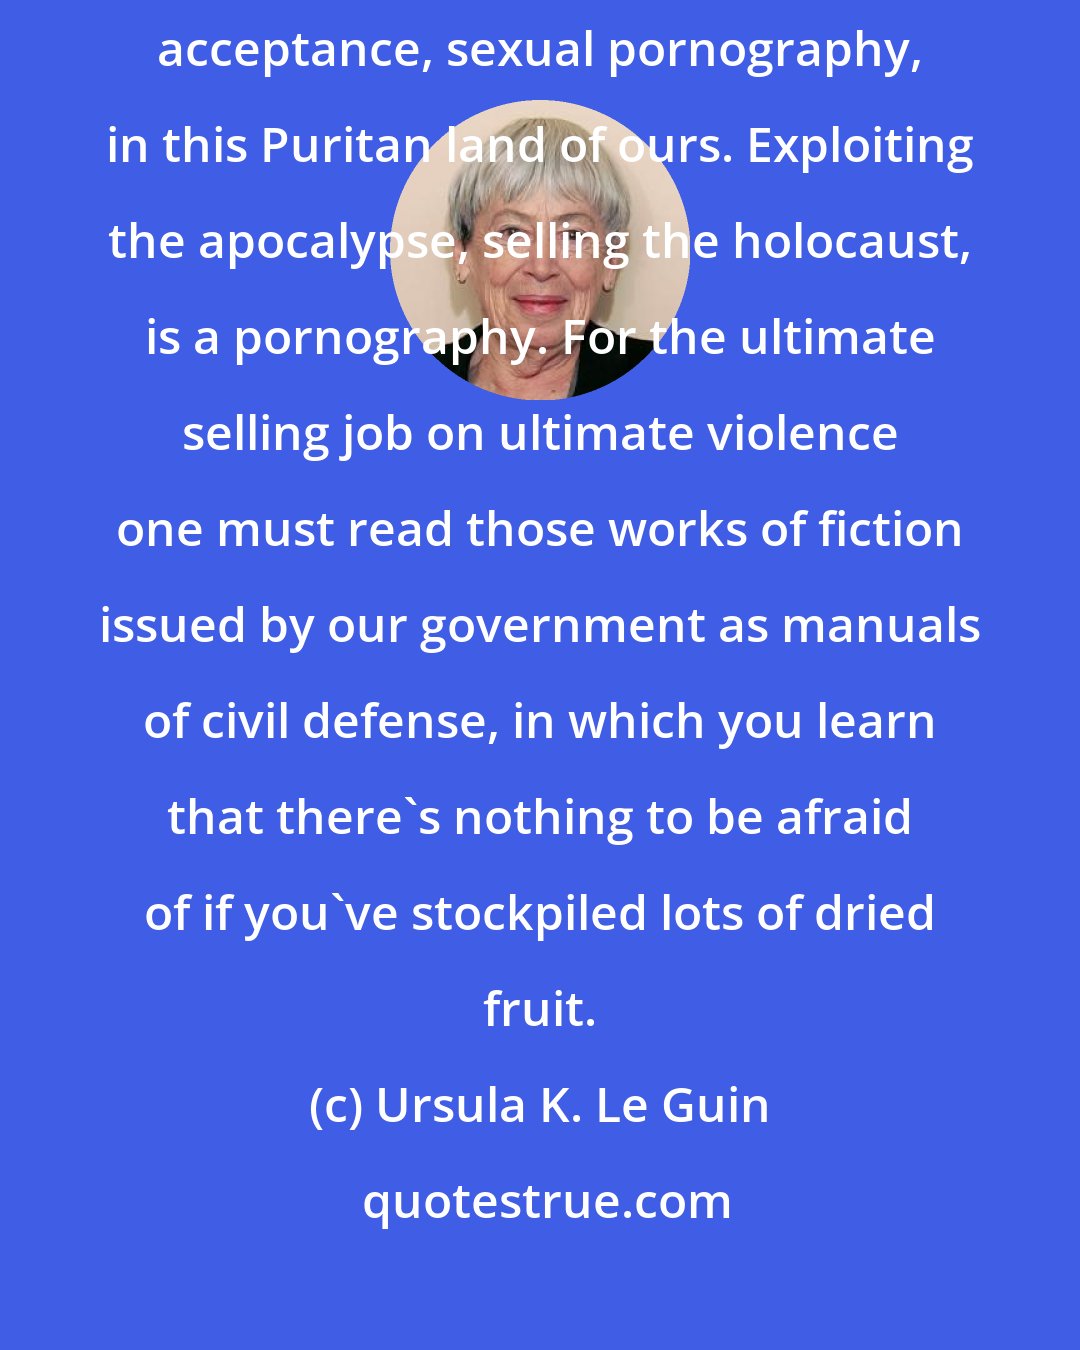 Ursula K. Le Guin: The pornography of violence of course far exceeds, in volume and general acceptance, sexual pornography, in this Puritan land of ours. Exploiting the apocalypse, selling the holocaust, is a pornography. For the ultimate selling job on ultimate violence one must read those works of fiction issued by our government as manuals of civil defense, in which you learn that there's nothing to be afraid of if you've stockpiled lots of dried fruit.